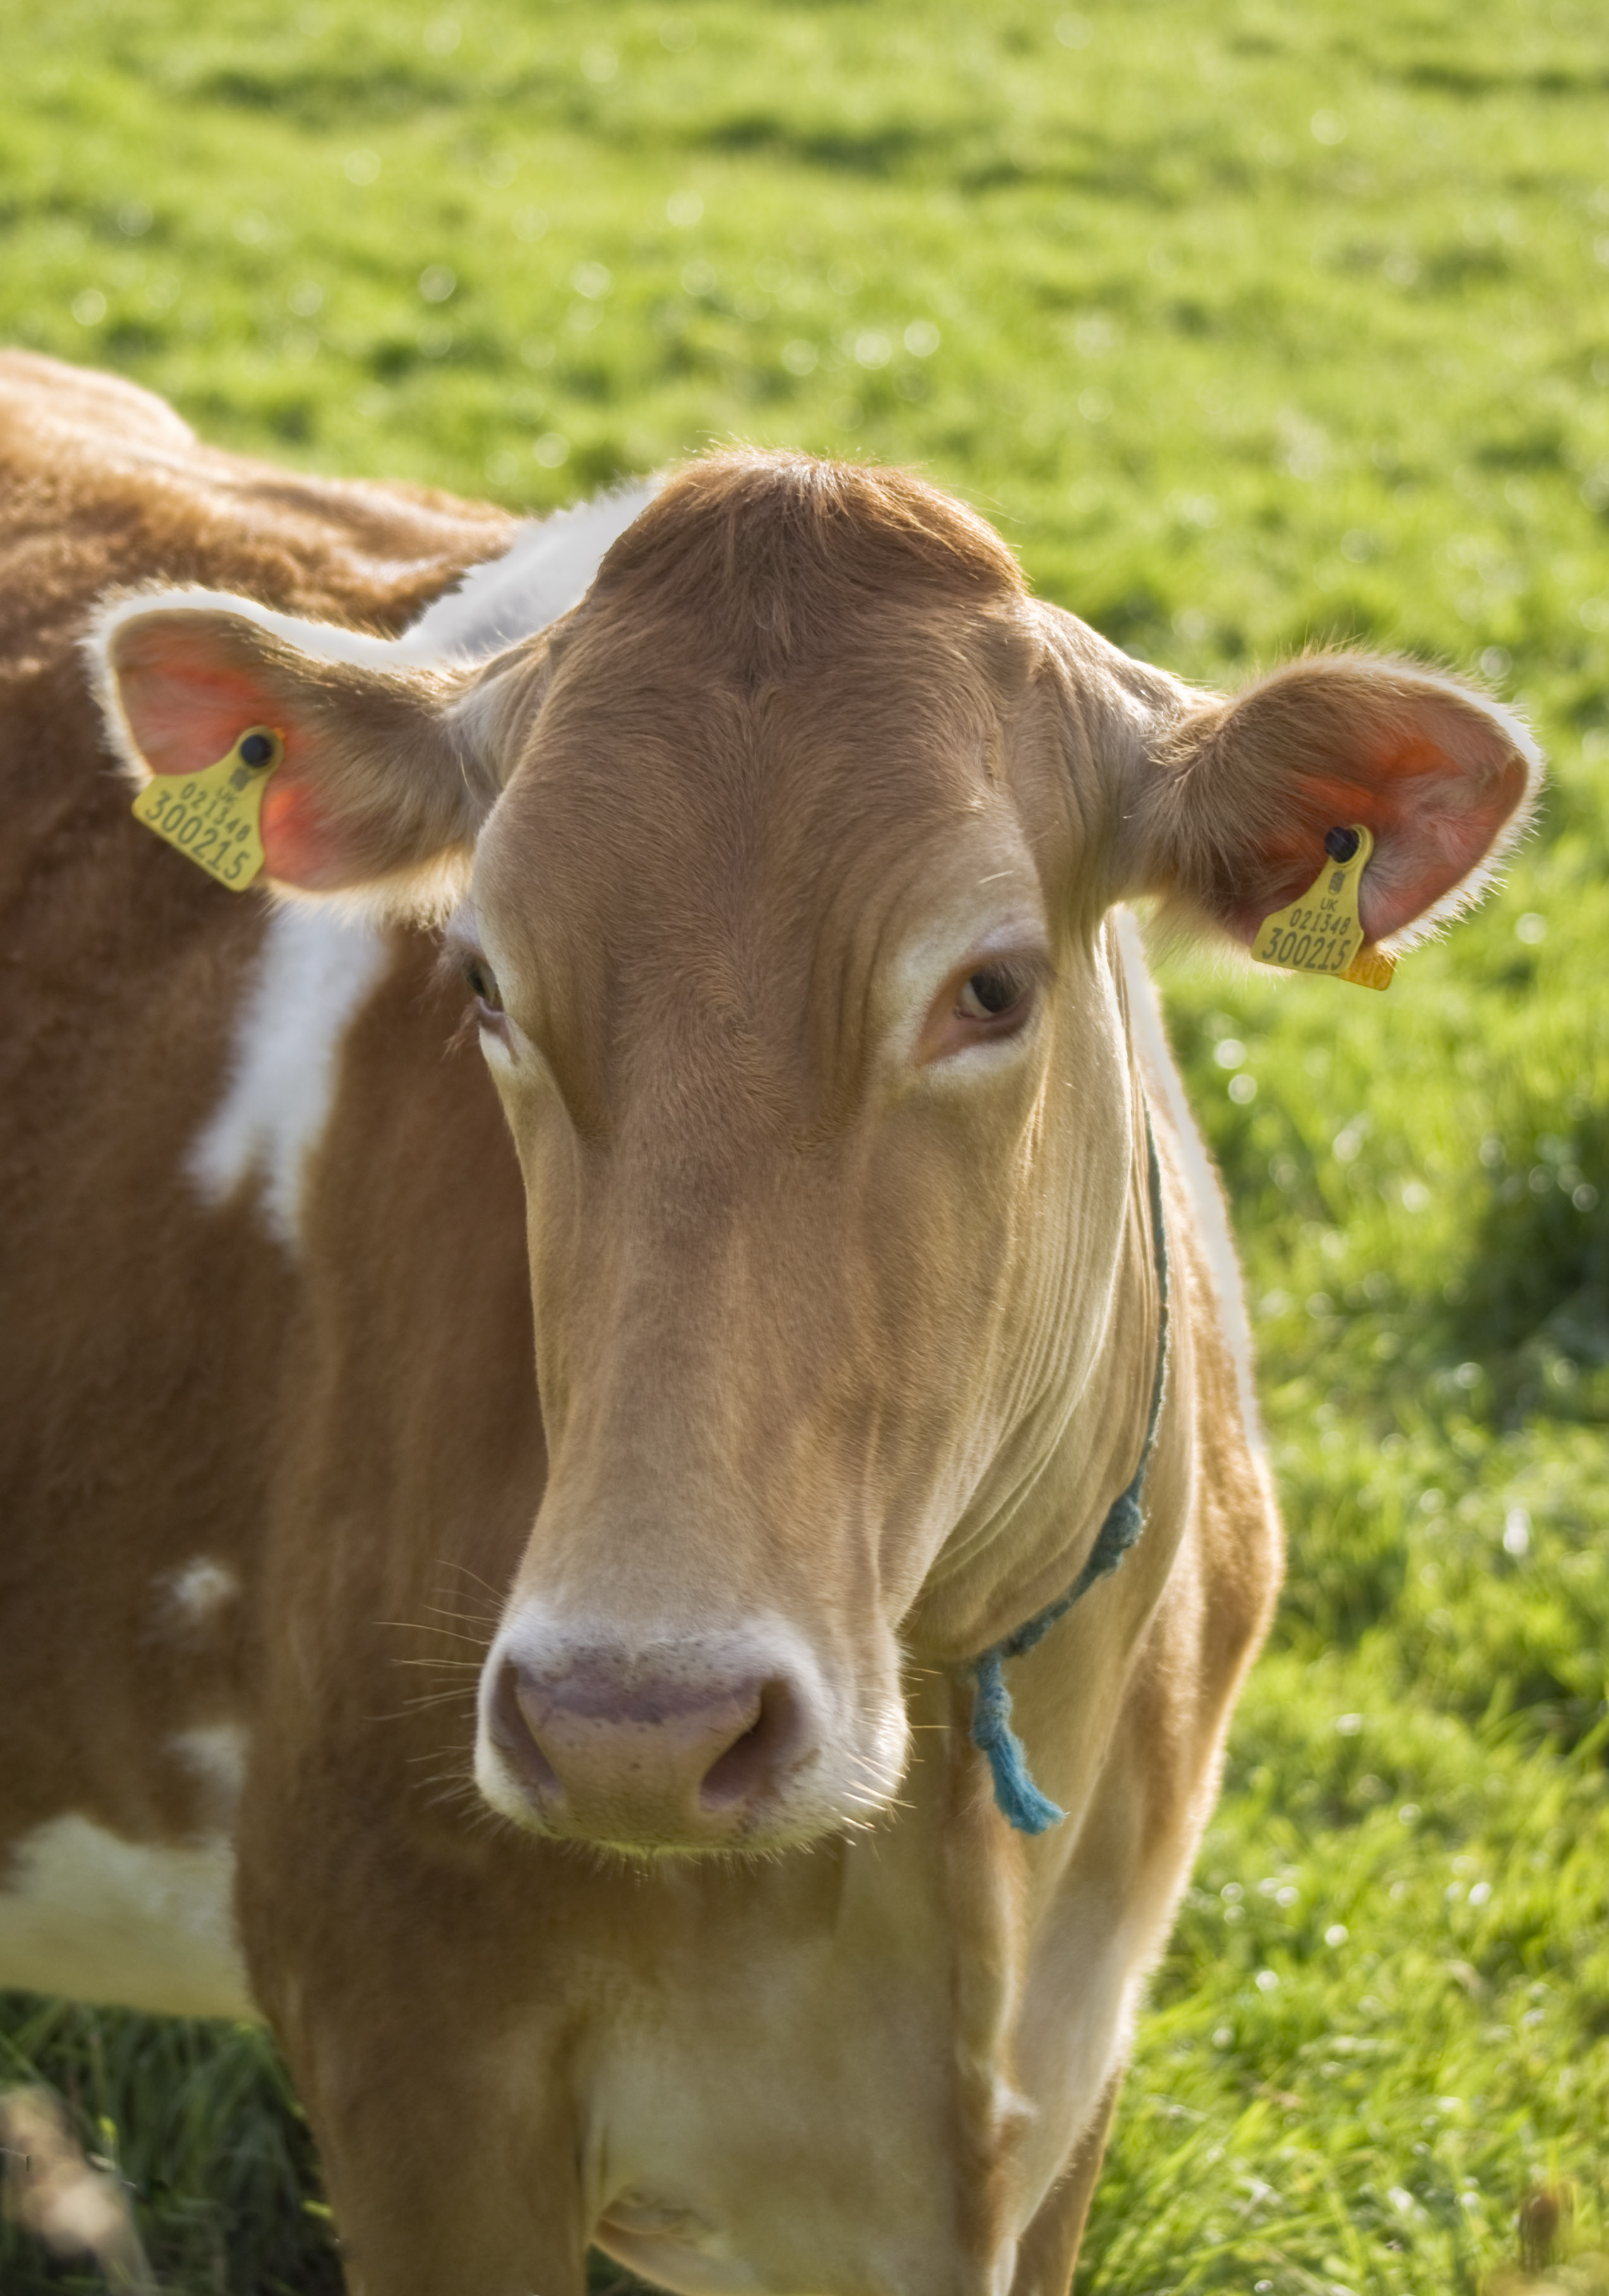 Branding, It's Not Just For Cows, But For Law Firms and Lawyers, Too